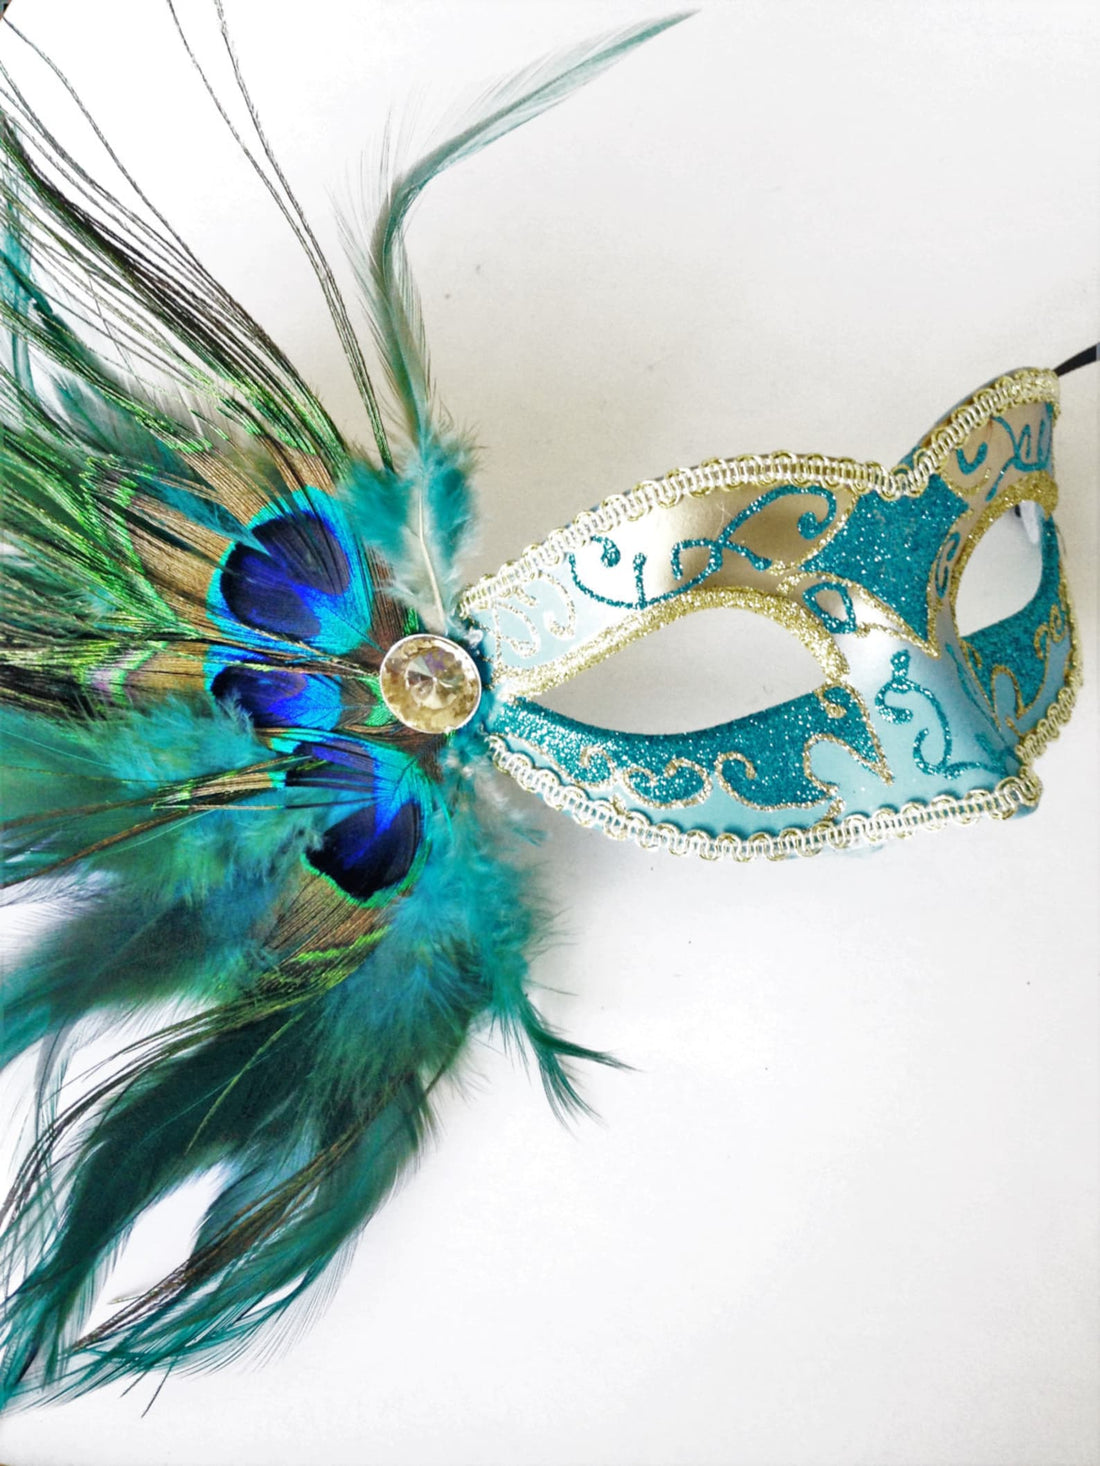 Womens peacock feather masquerade mask in turquoise for sale.